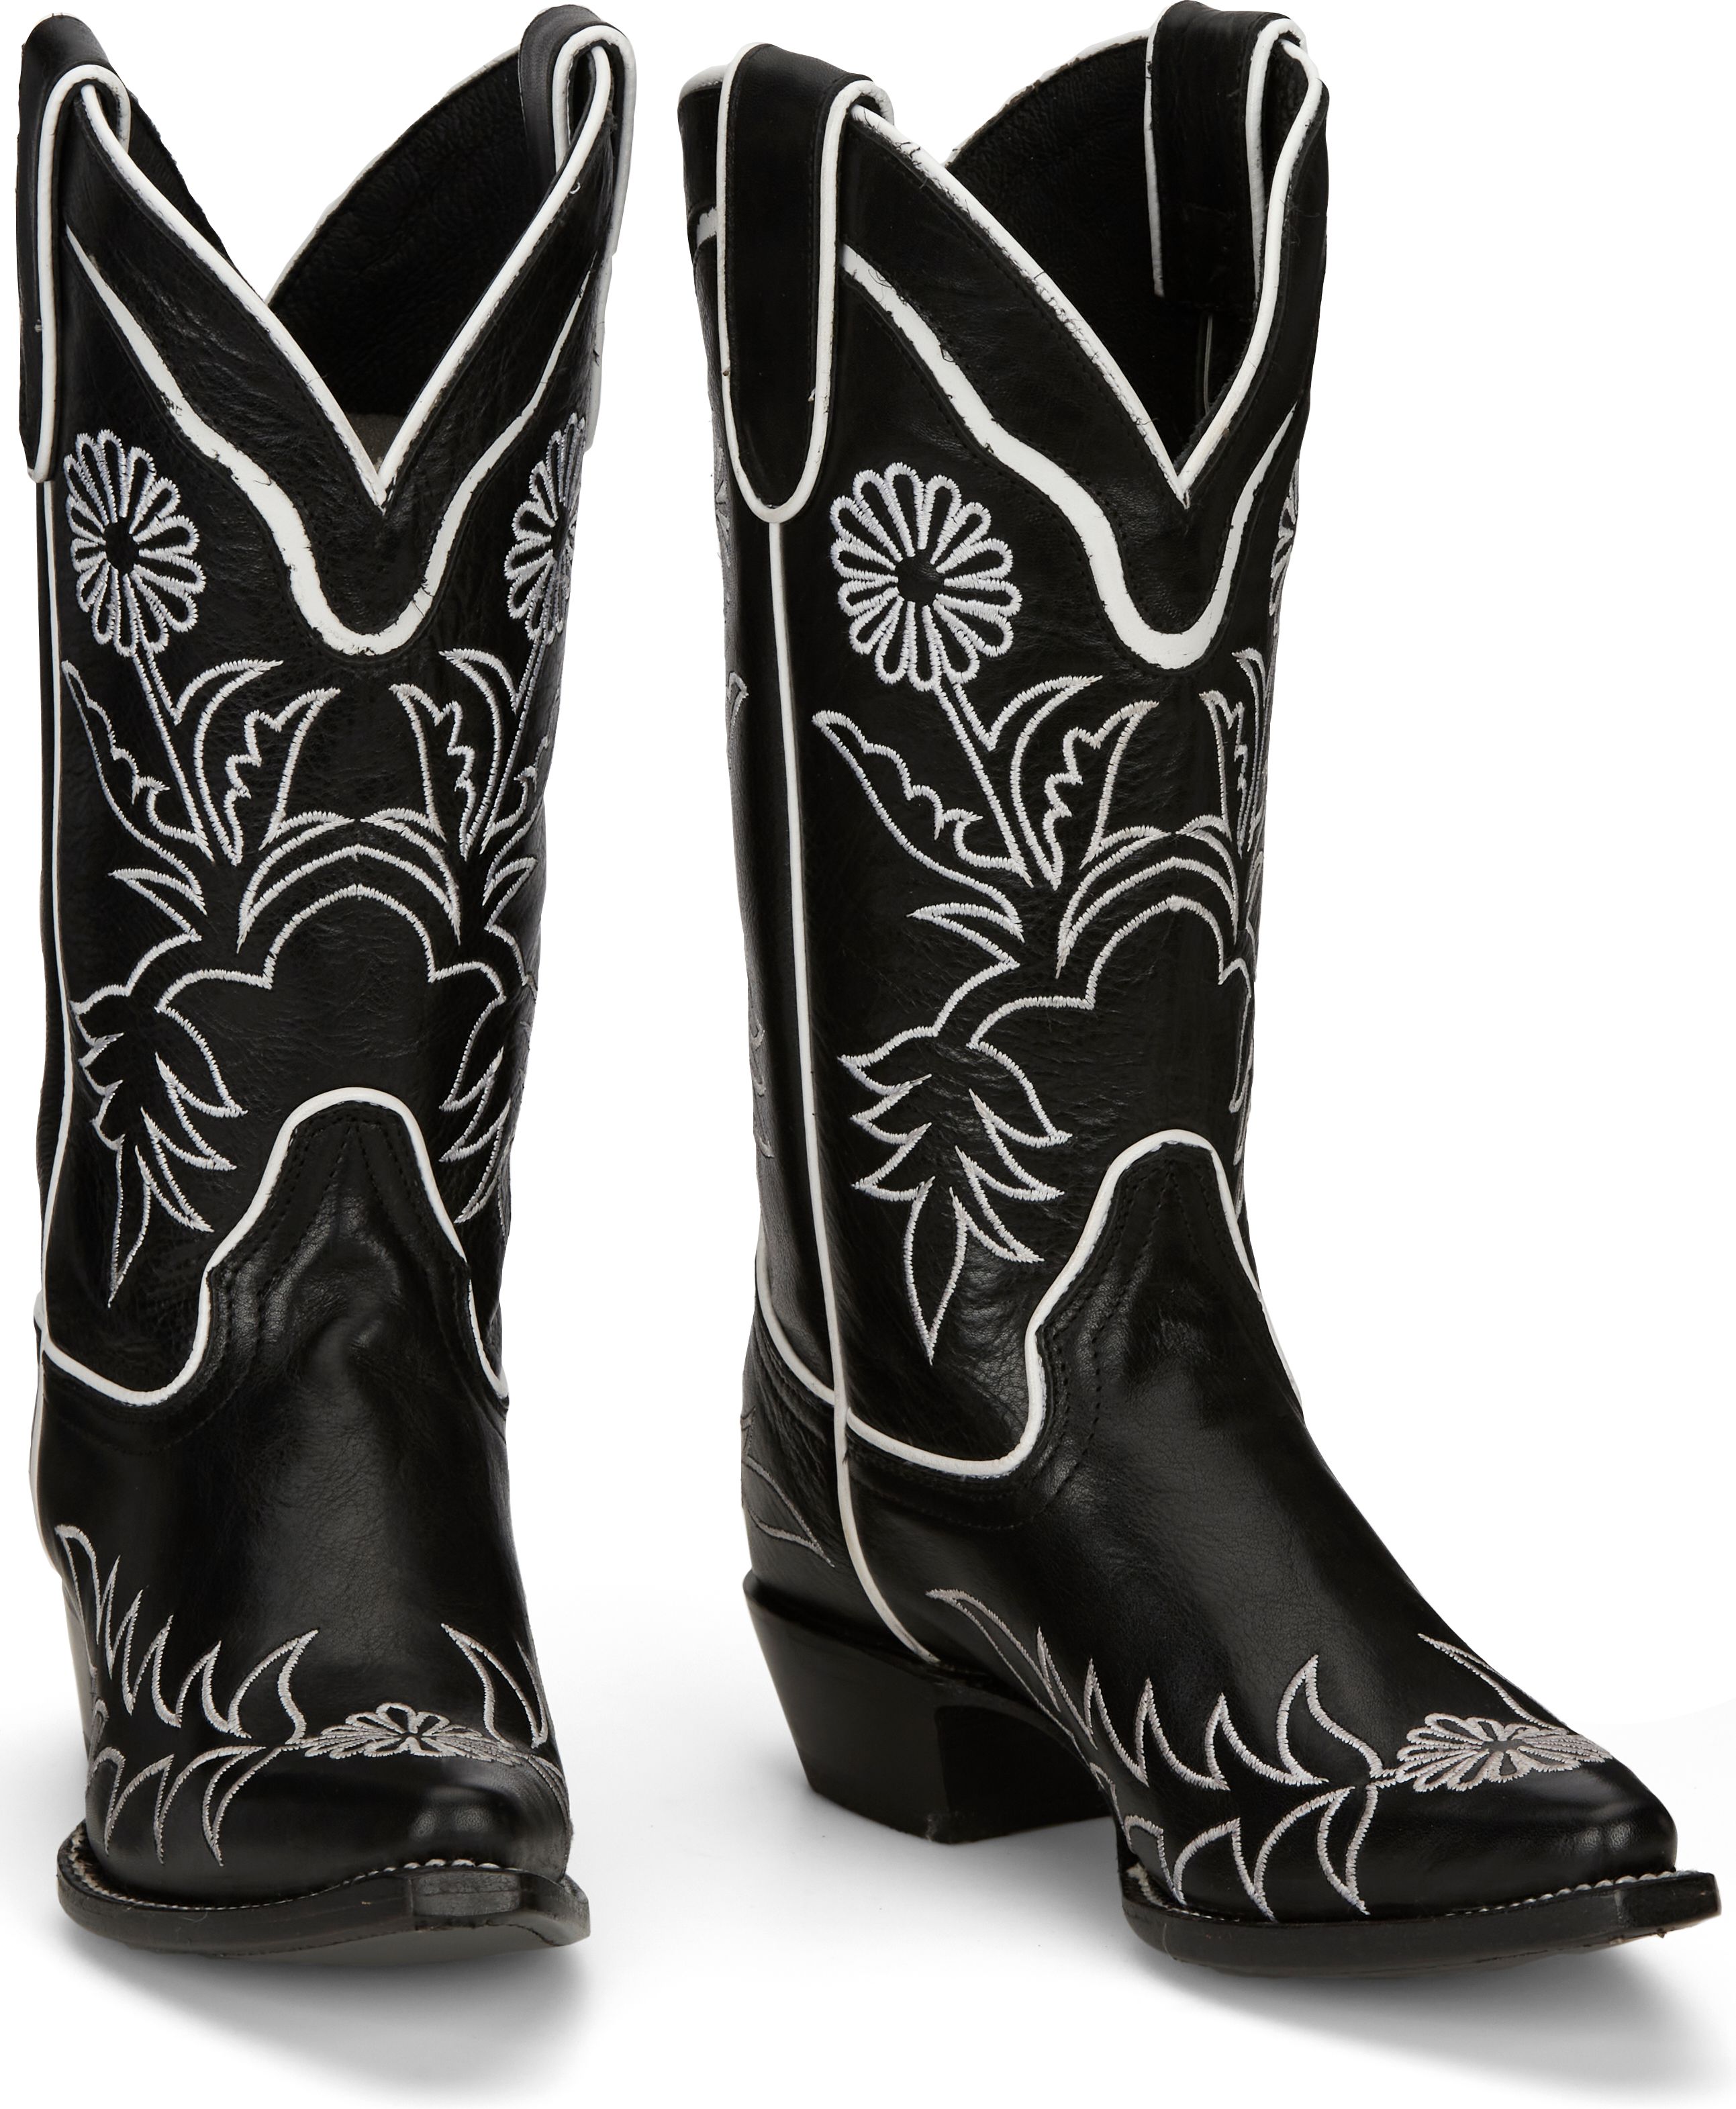 Reba by Justin New Two Step Western Boots